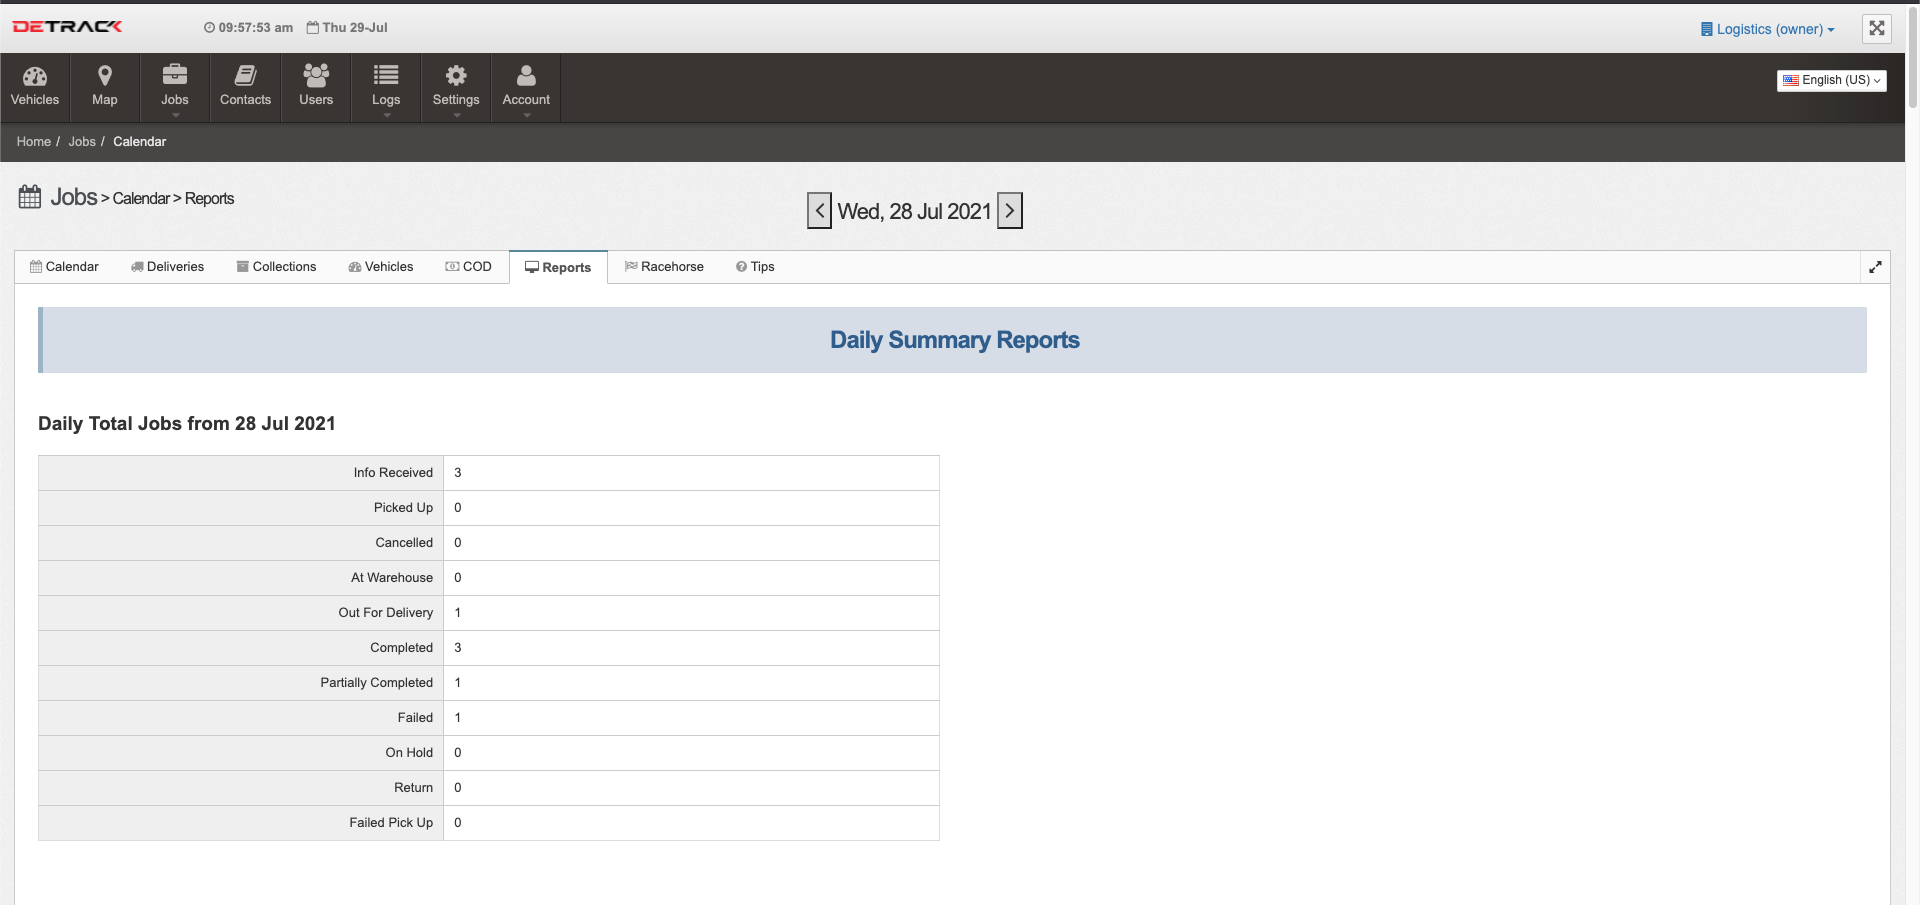 Detrack Software - Daily Summary Reports